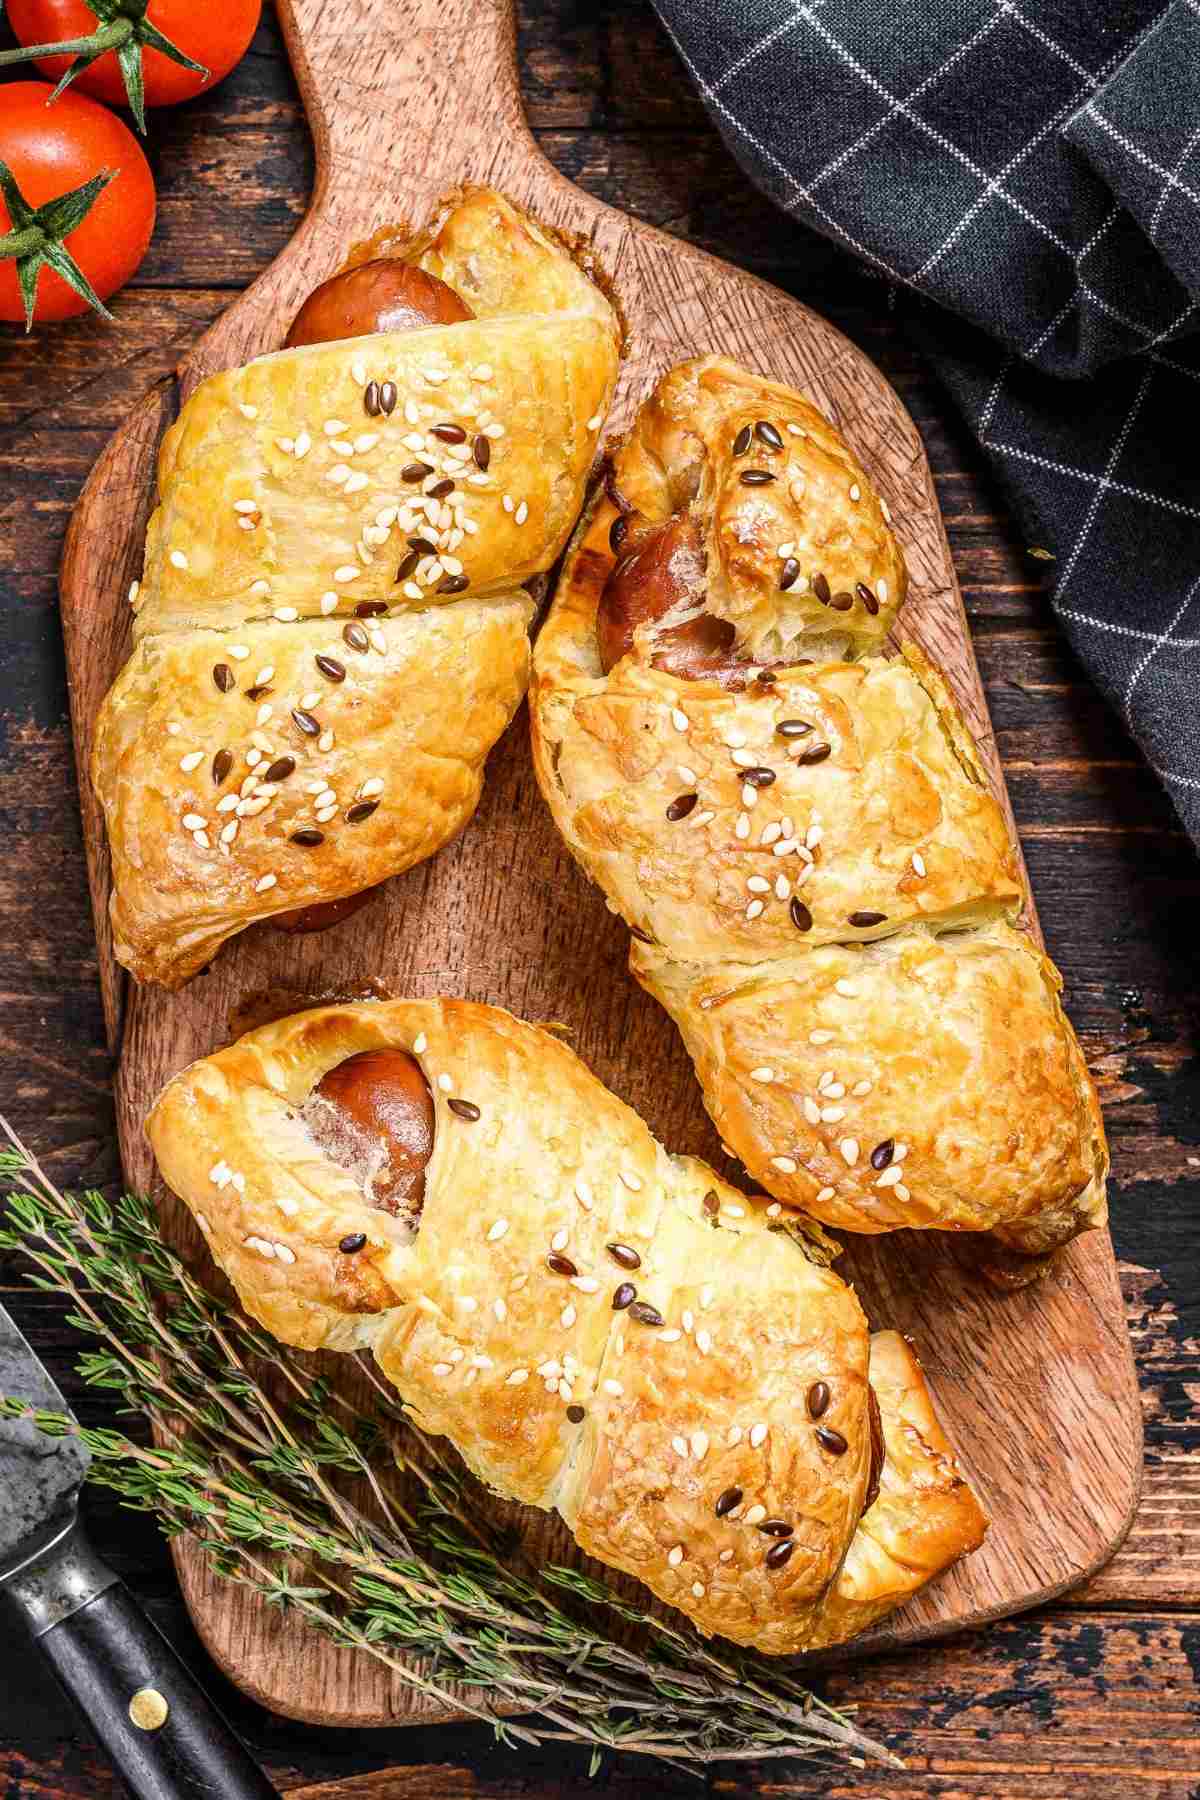 Pigs in a blanket have been a classic party food for decades. Made with store-bought crescent roll dough and cocktail sausages, they’re super easy to make.